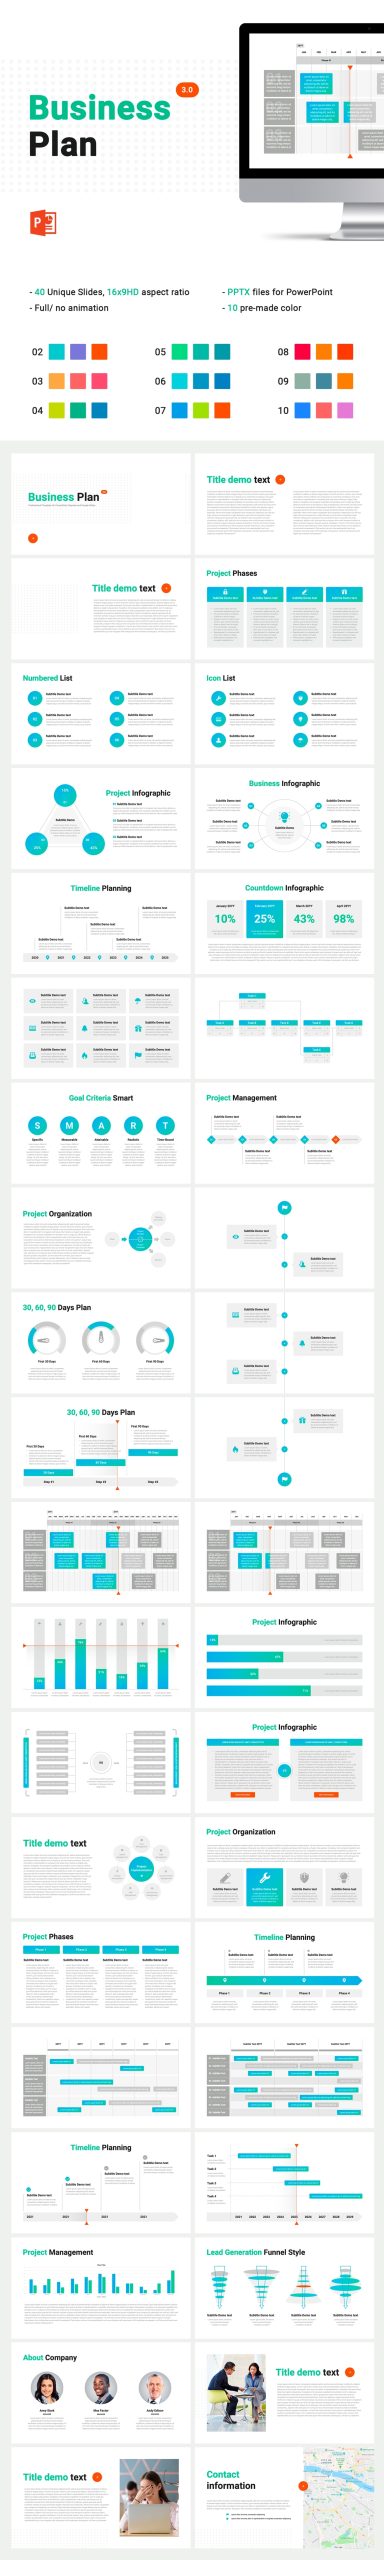 Business Plan Powerpoint Template – Download Now! Throughout Business Plan Template Powerpoint Free Download